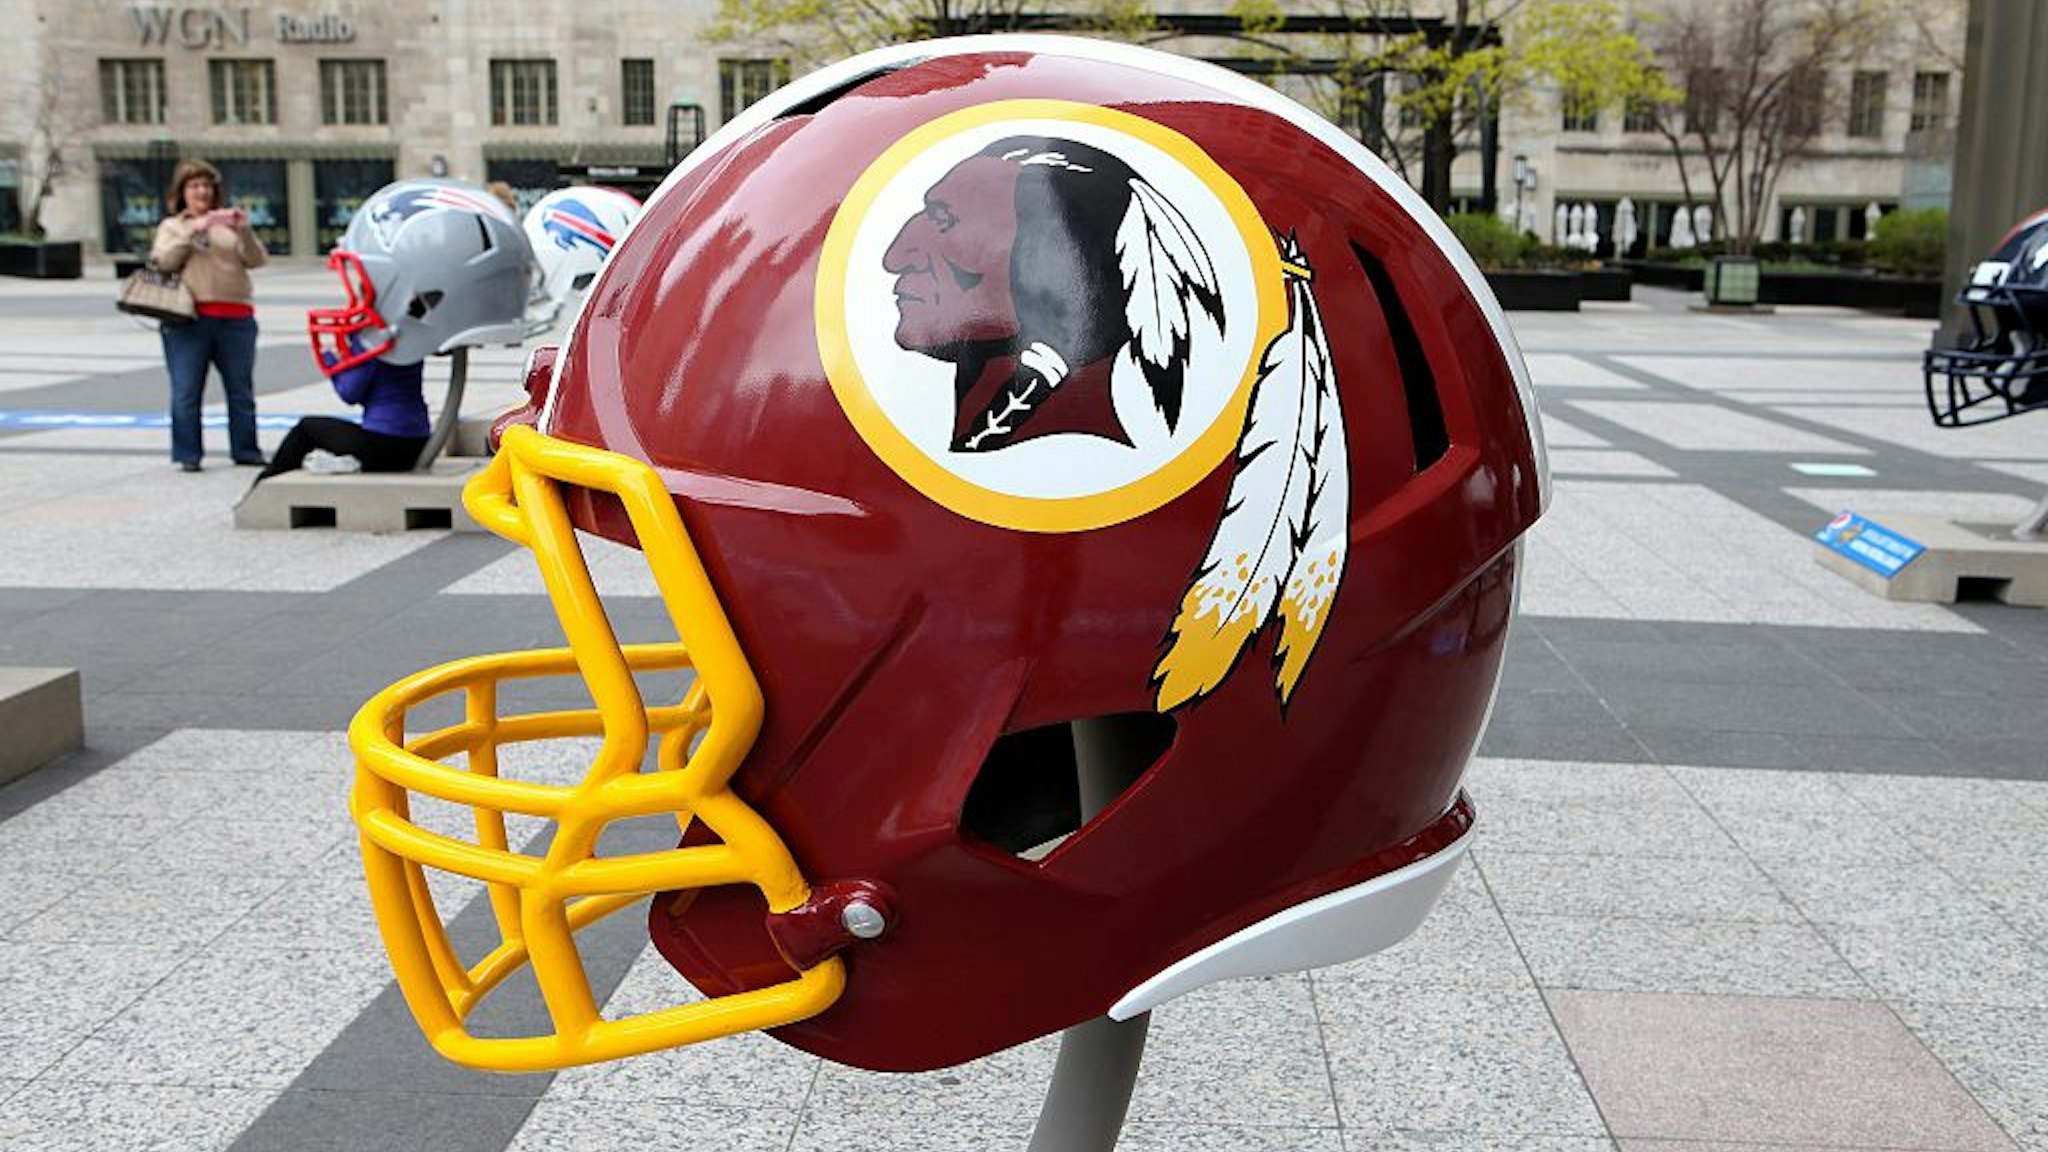 CHICAGO - APRIL 30: Washington Redskins NFL football helmet is on display in Pioneer Court to commemorate the NFL Draft 2015 in Chicago on April 30, 2015 in Chicago, Illinois. (Photo By